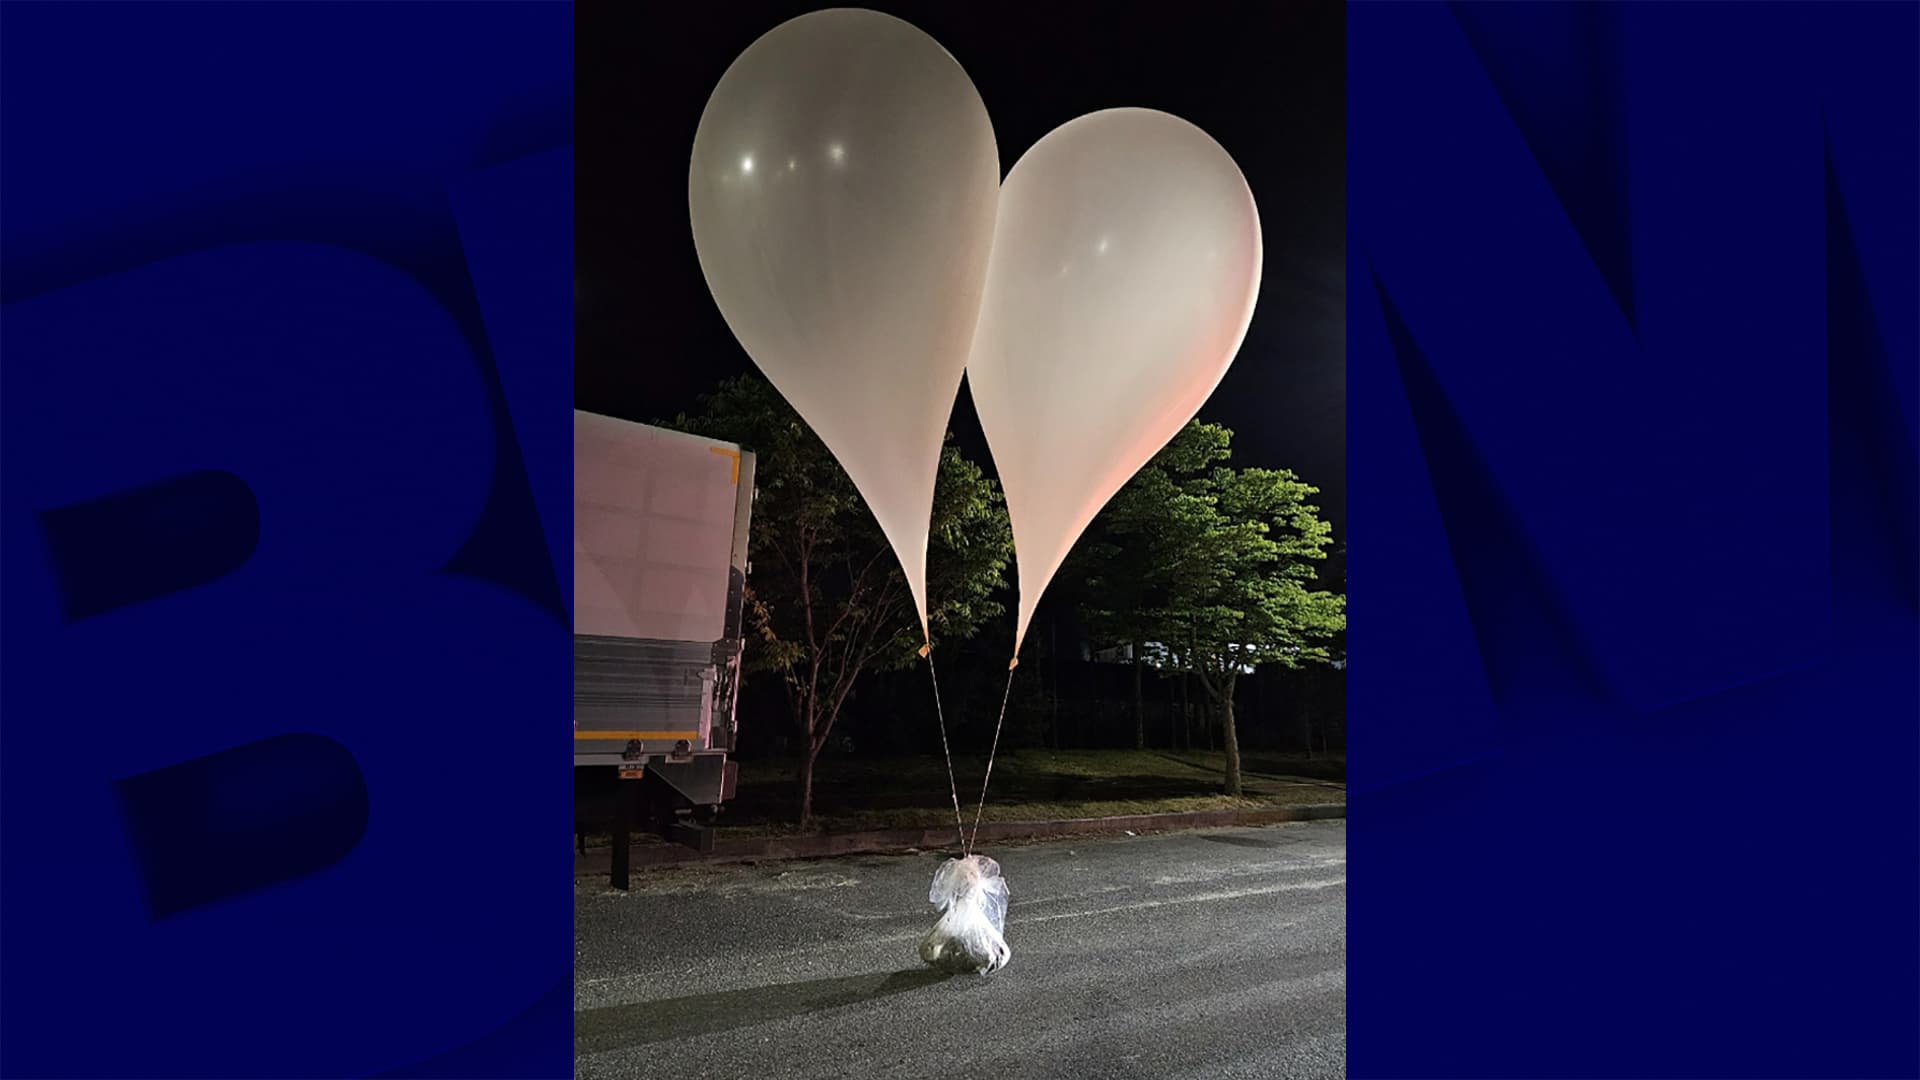 North Korea sends more than 600 new balloons filled with garbage to South Korea